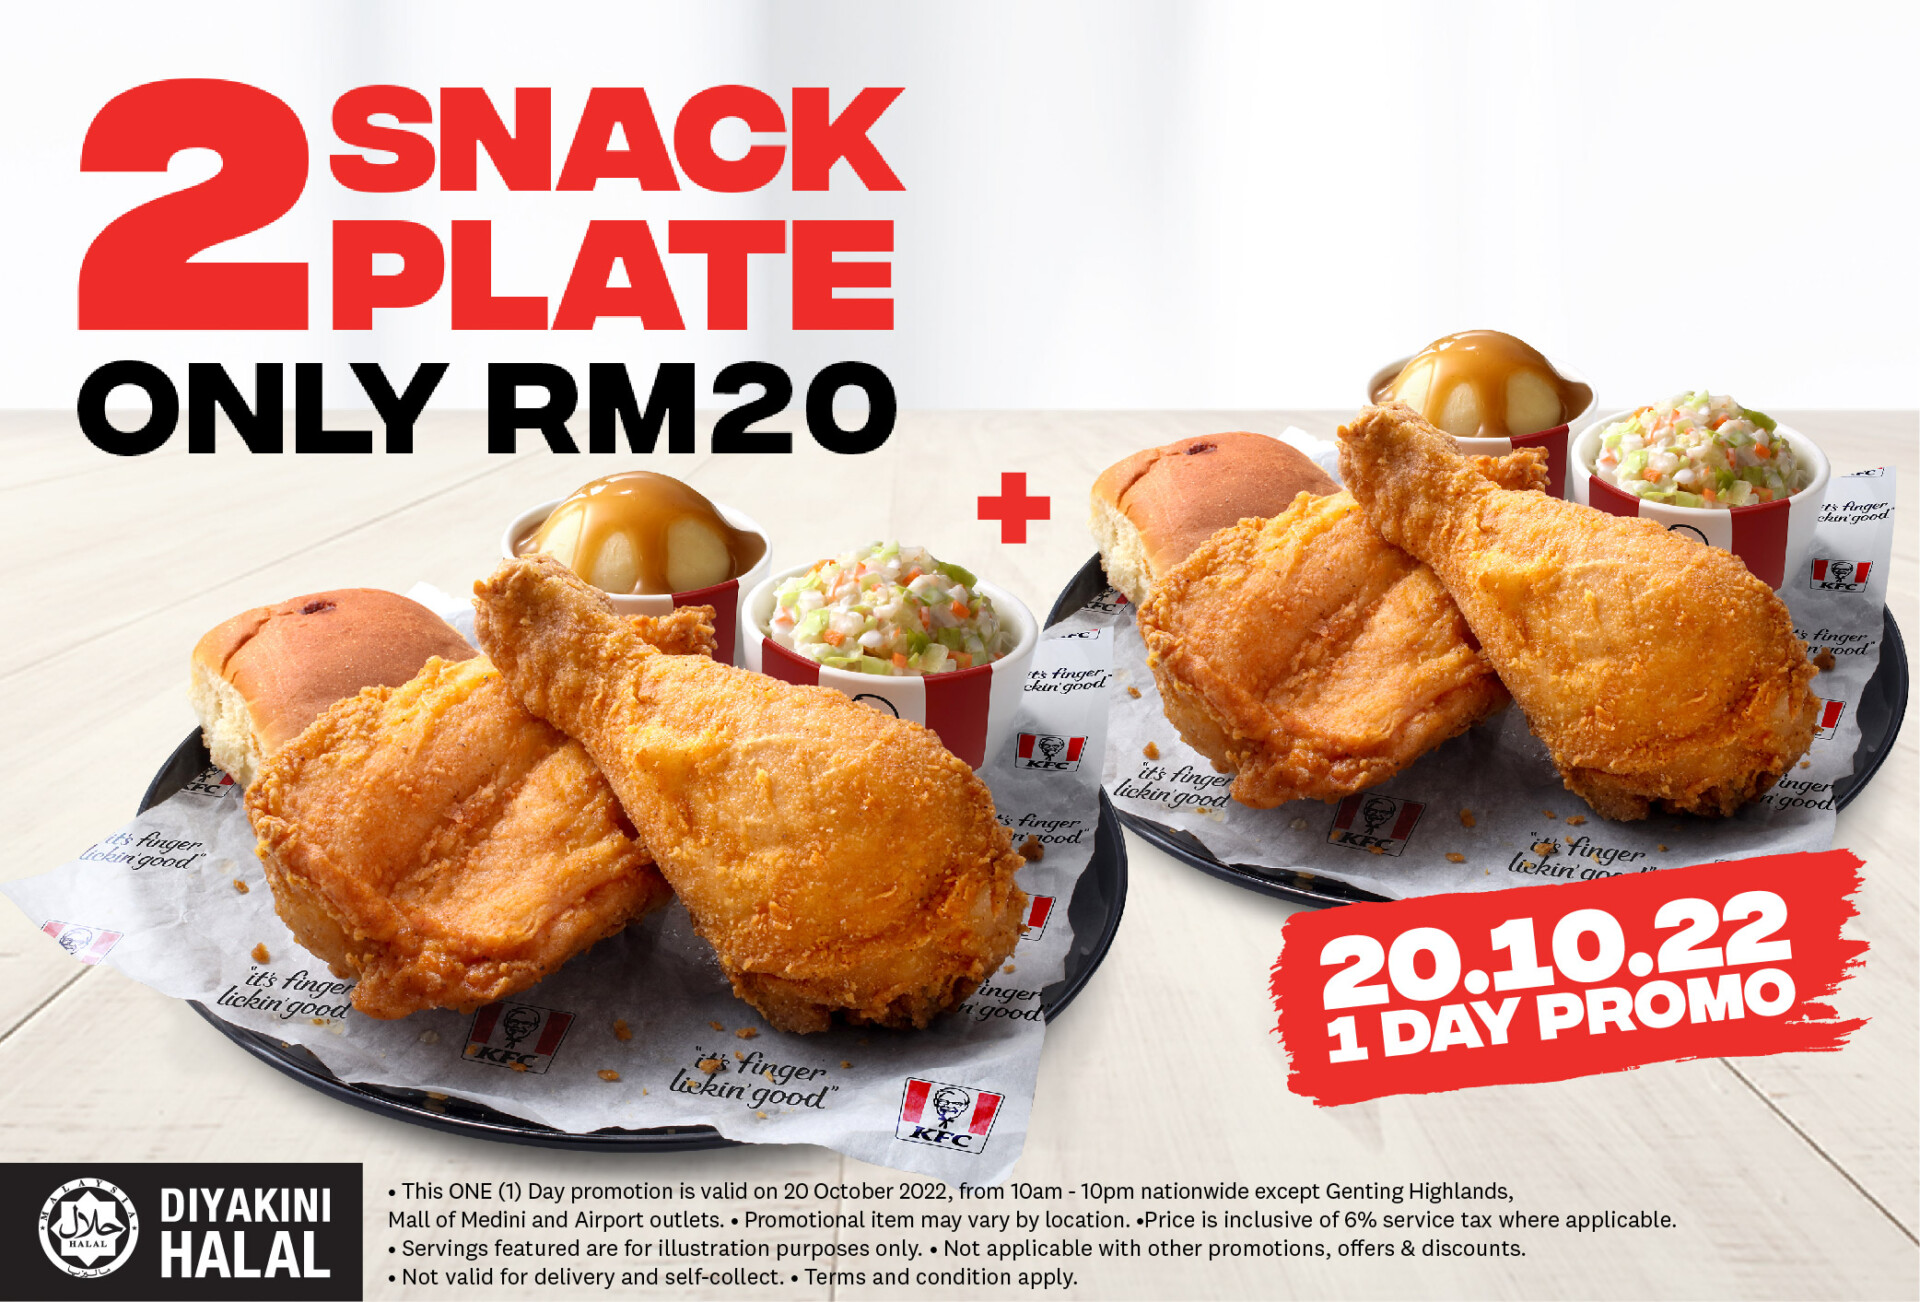 Calling All KFC Fans! The RM20 For 2 Snack Plate Combo Promo Is Back